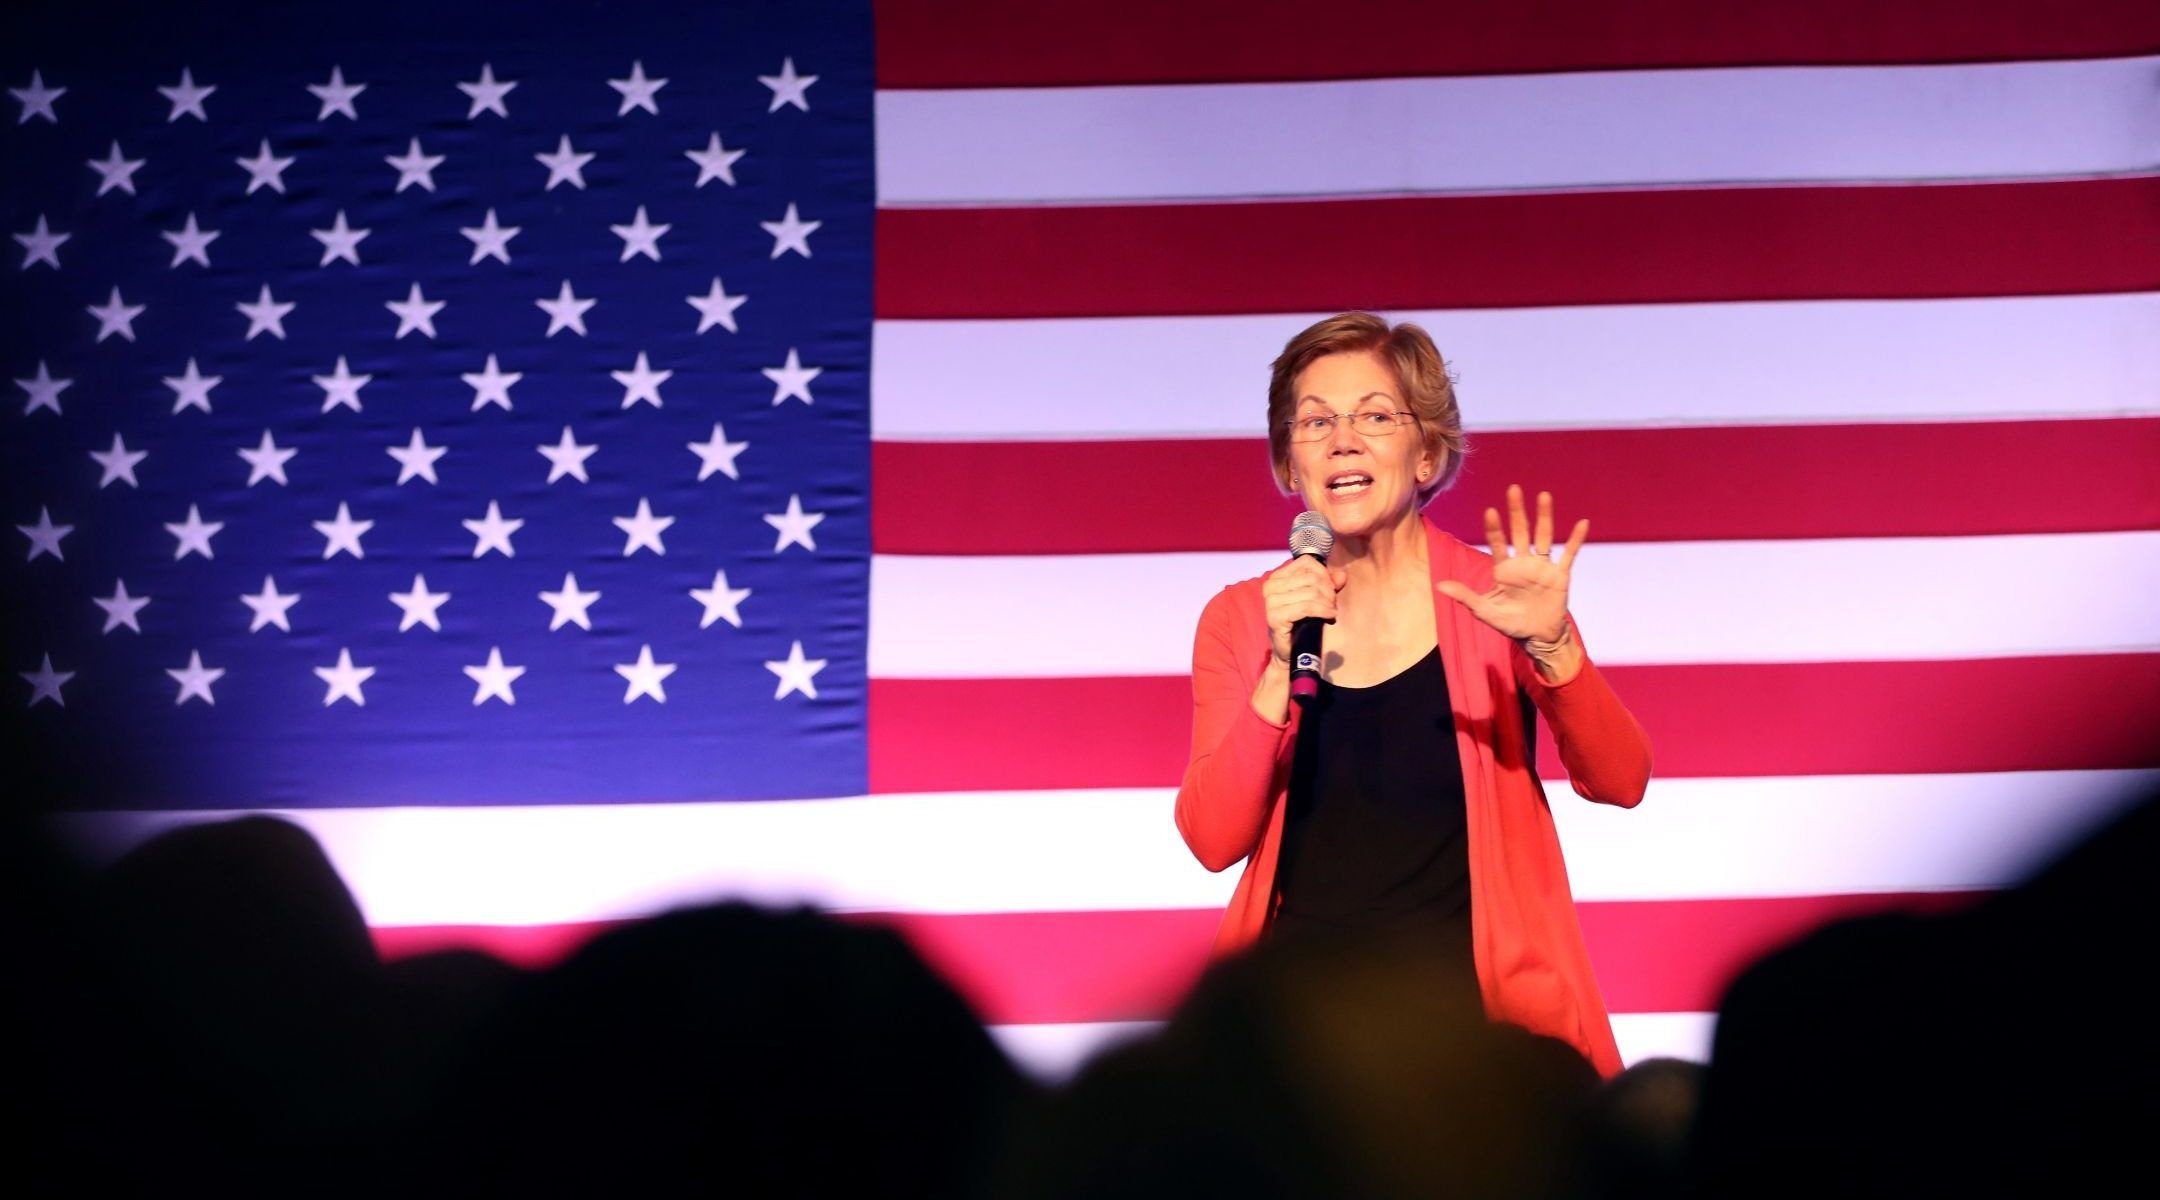 Democratic presidential candidate Sen. Elizabeth Warren speaks during a campaign event at Tupelo Music Hall in Derry, N.H., Feb. 6, 2020. (Justin Sullivan/Getty Images)